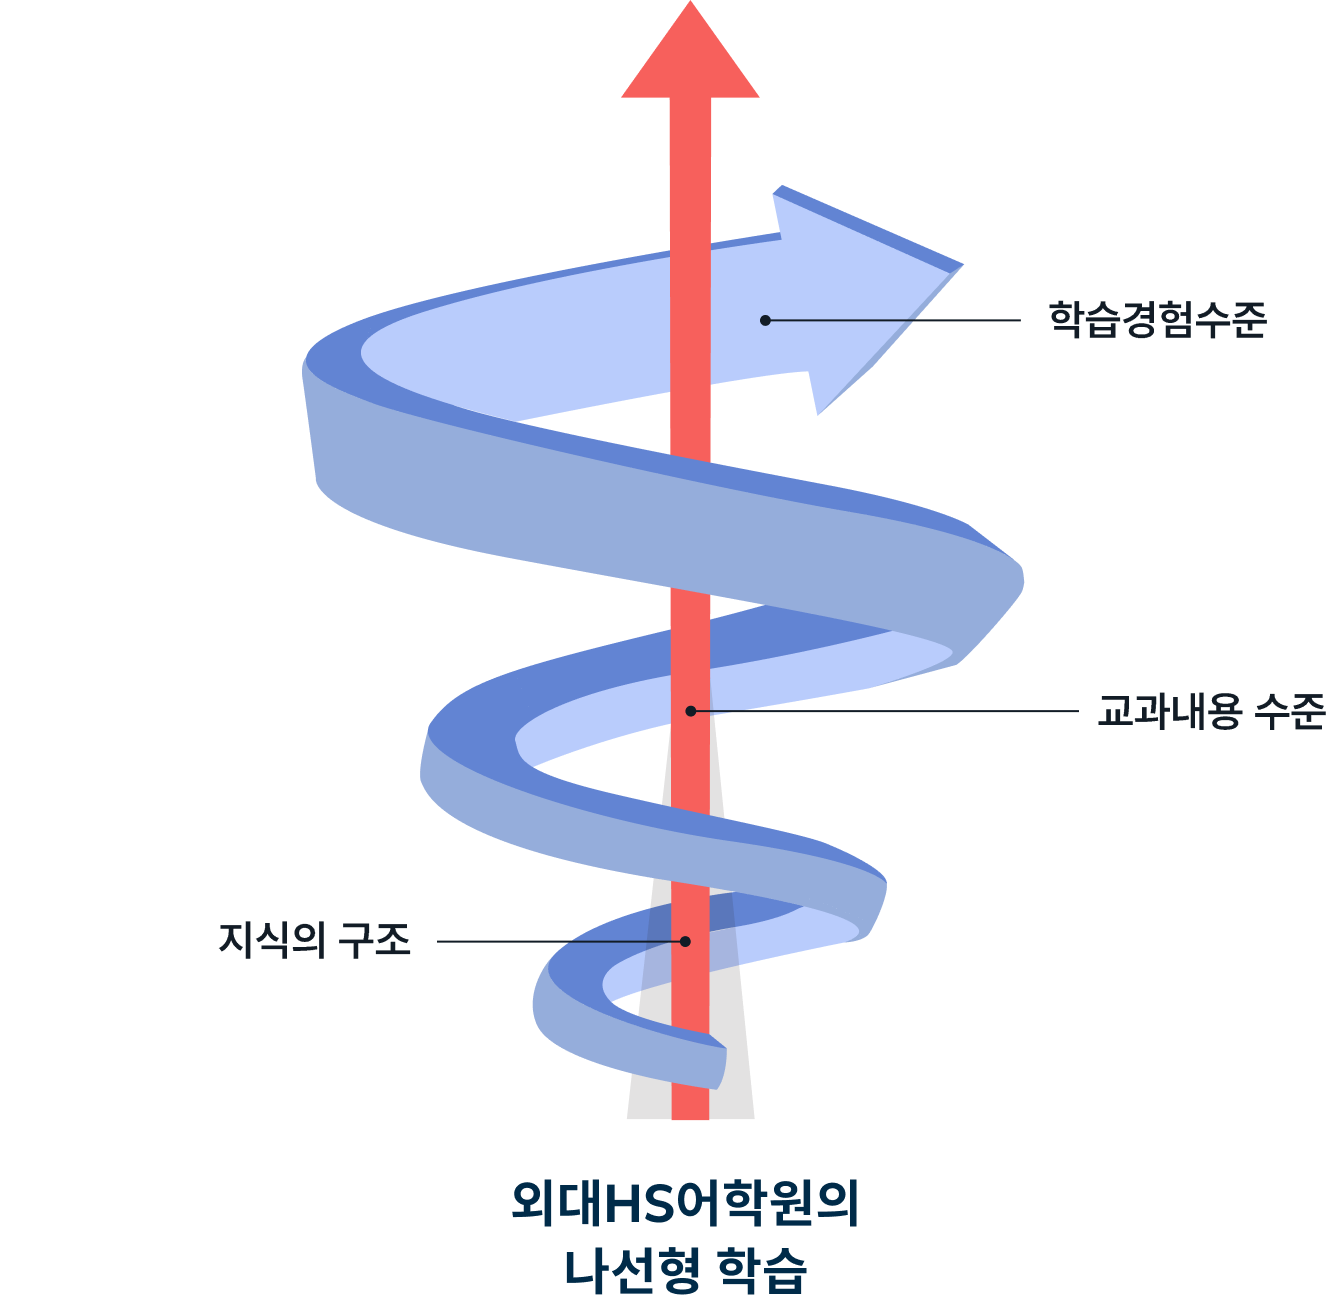 spiral learning image